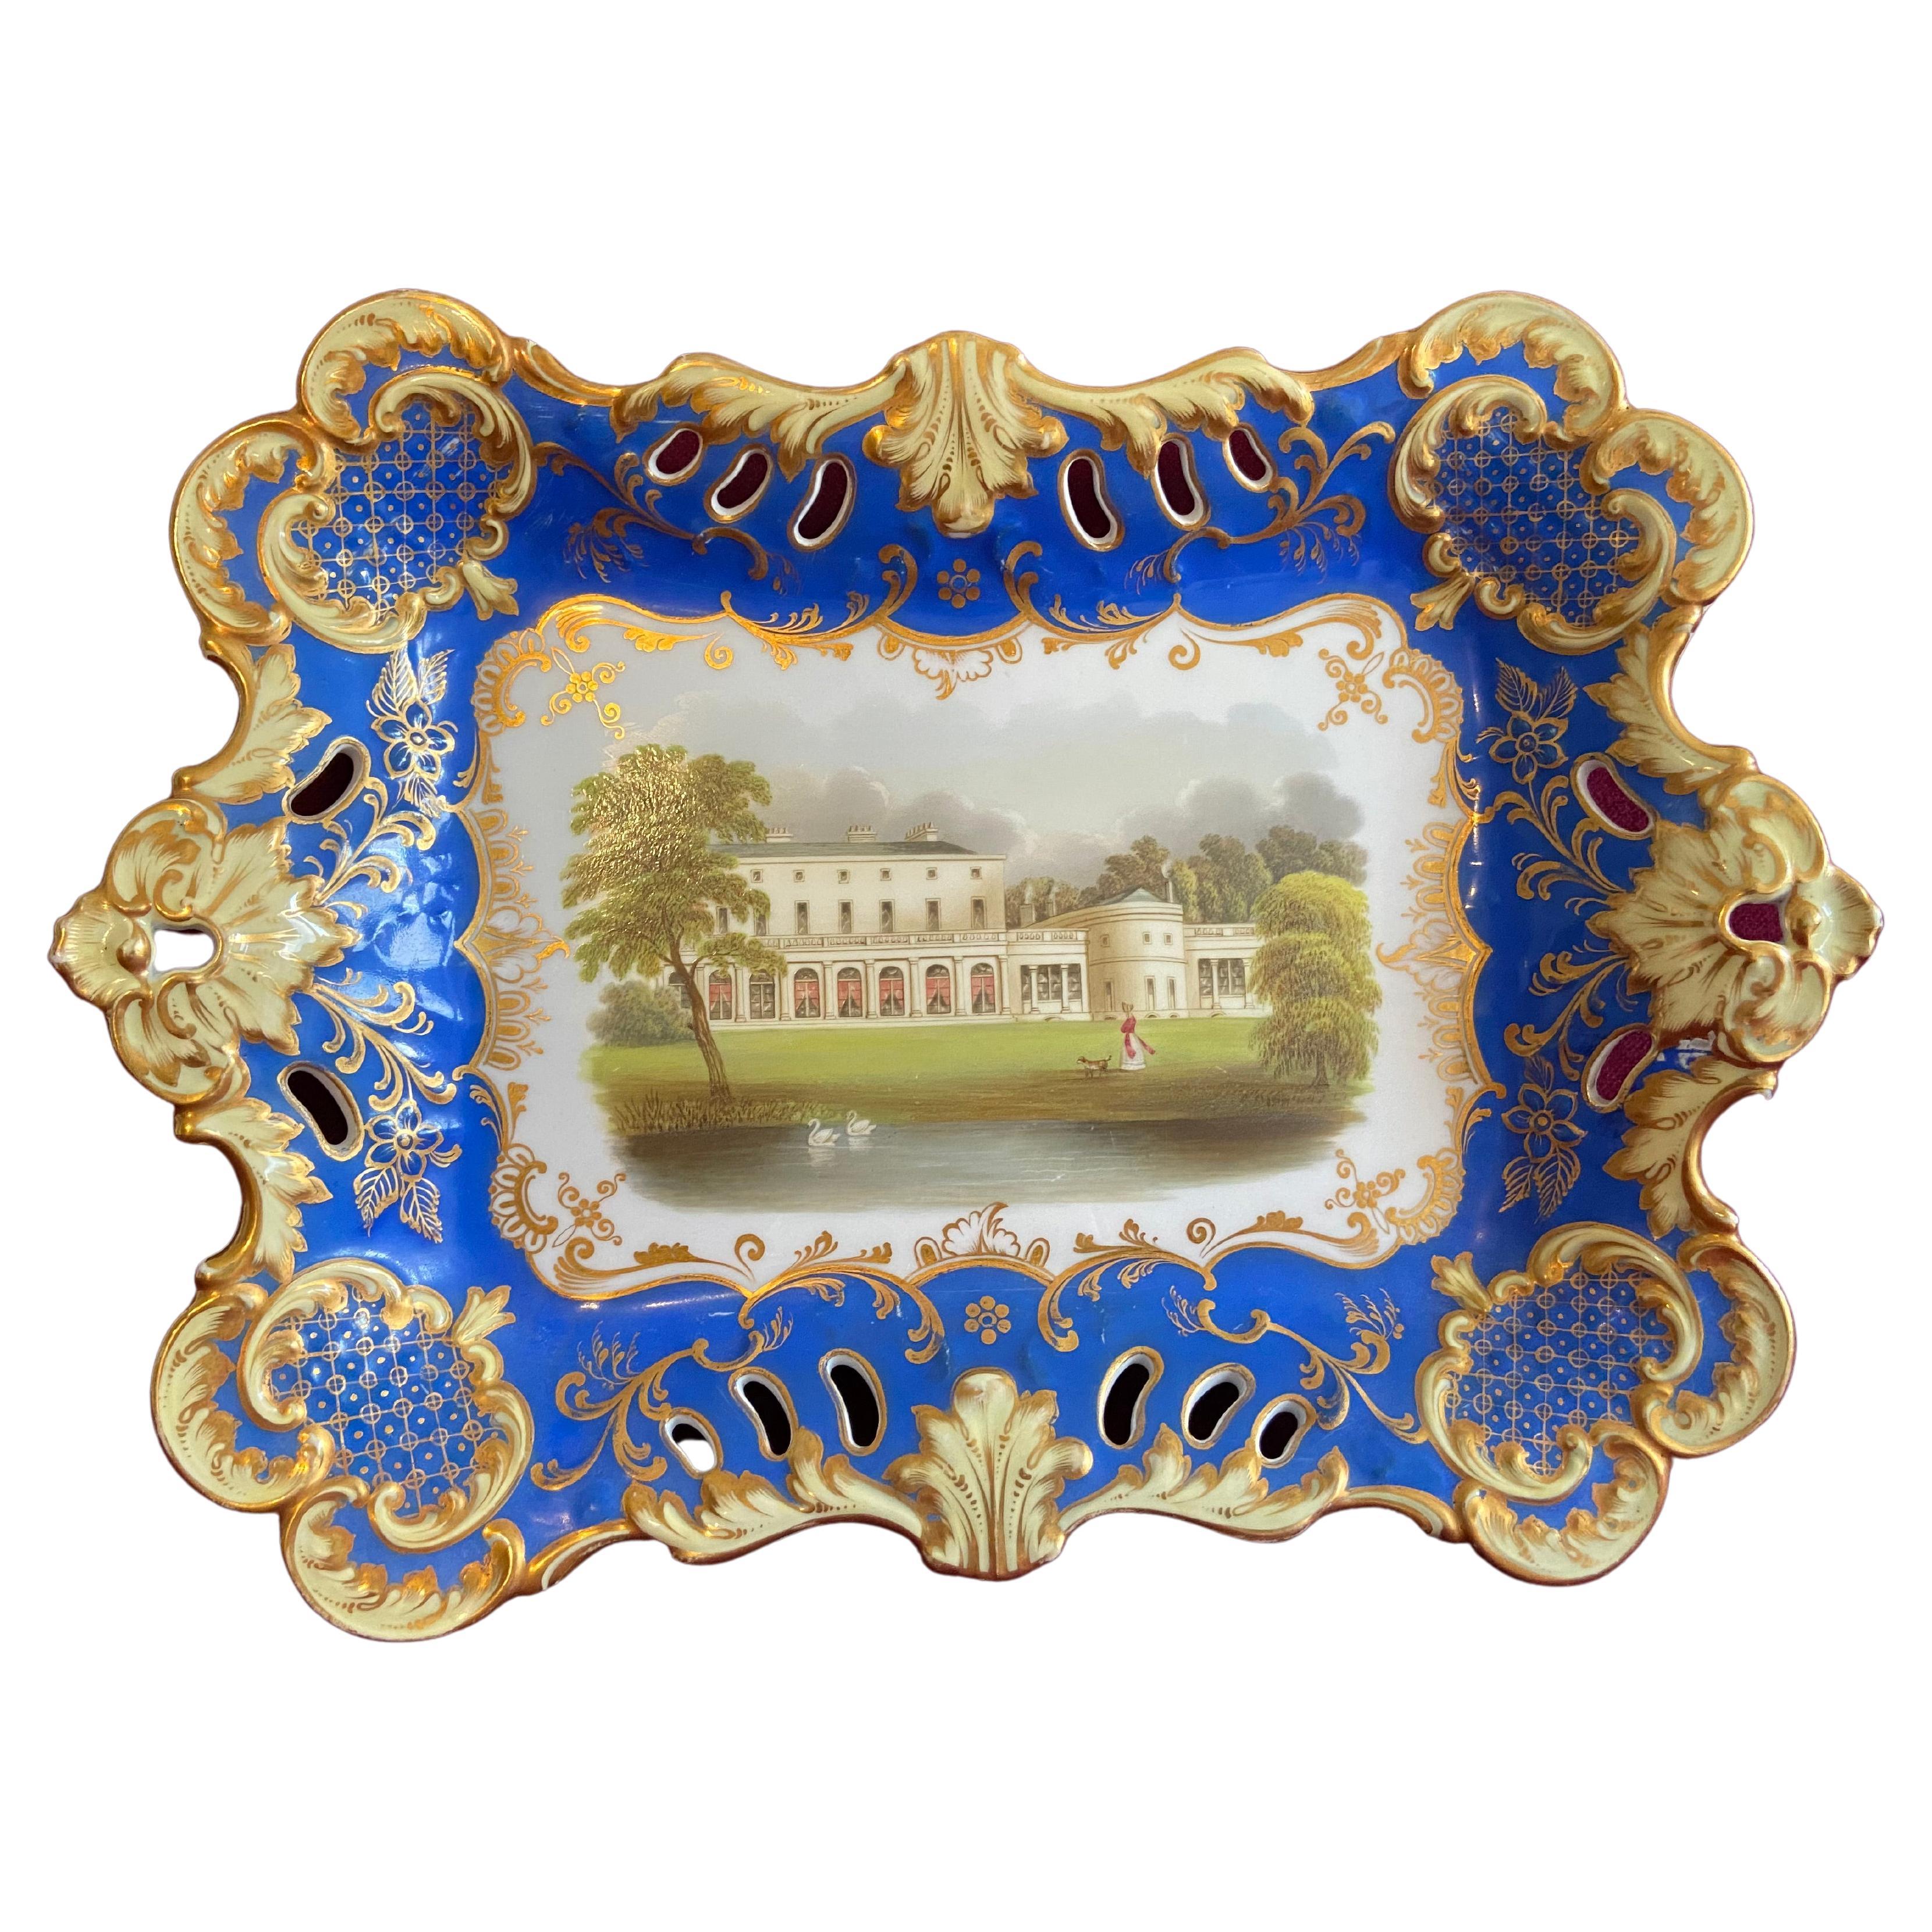 An English Porcelain Tray c.1830 with a view of Frogmore House